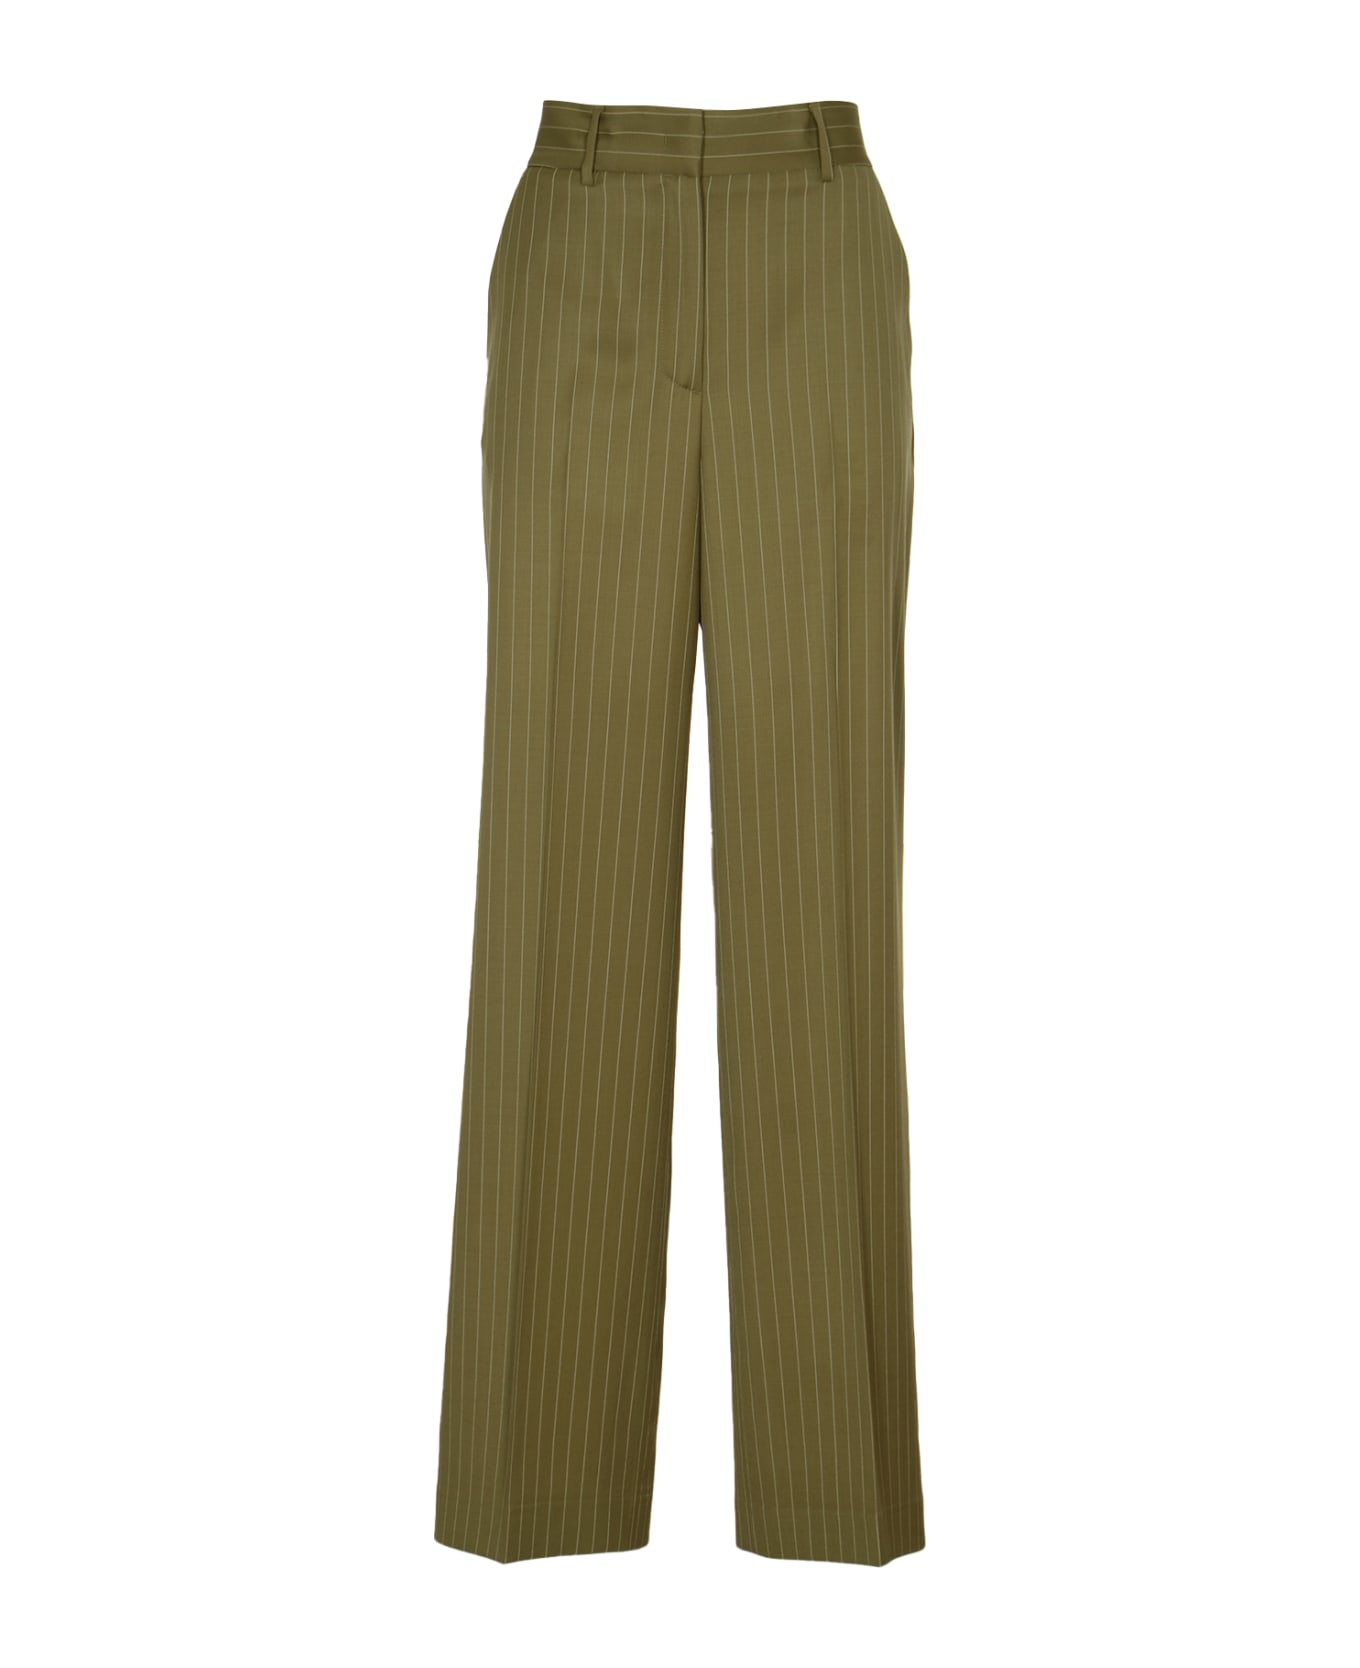 MSGM Pinstripe Trousers - Green ボトムス